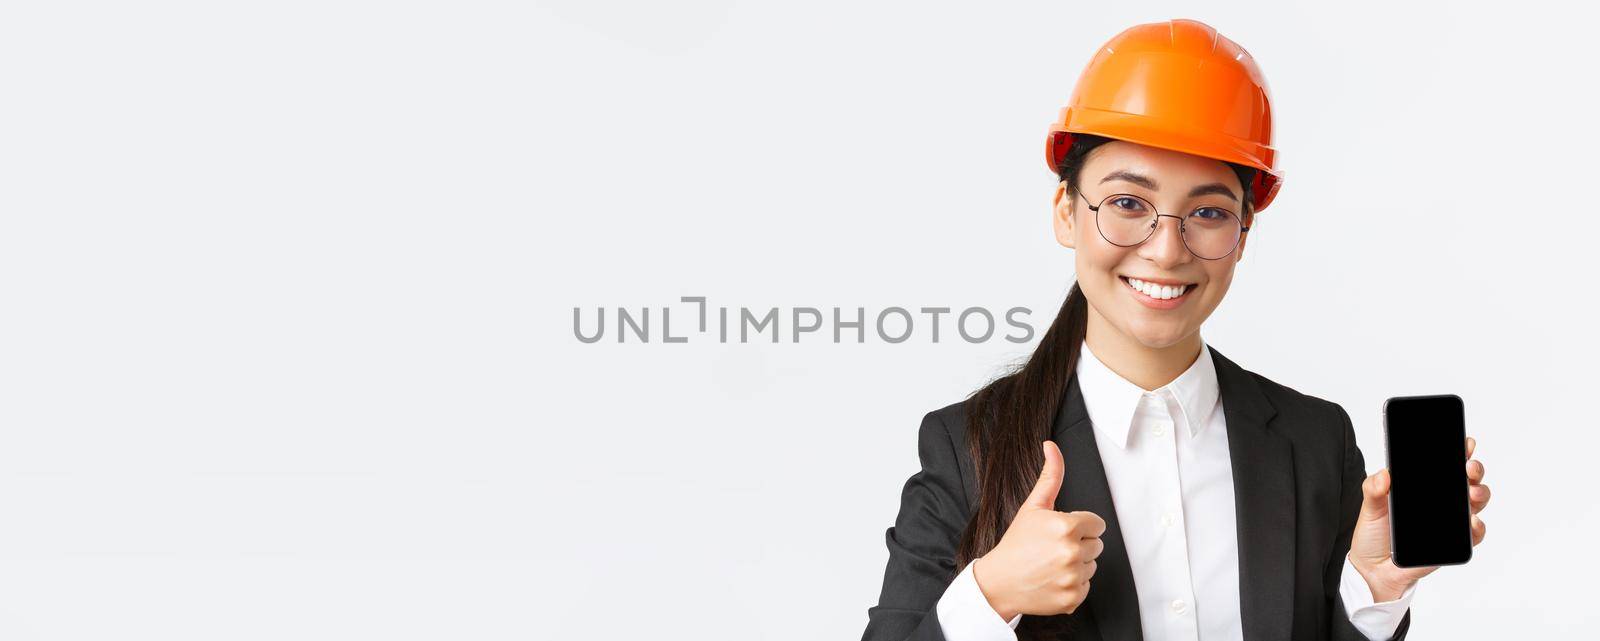 Close-up of professional smiling female engineer, construction manager in business suit and safety helmet, showing smartphone screen and thumbs-up in approval, white background.